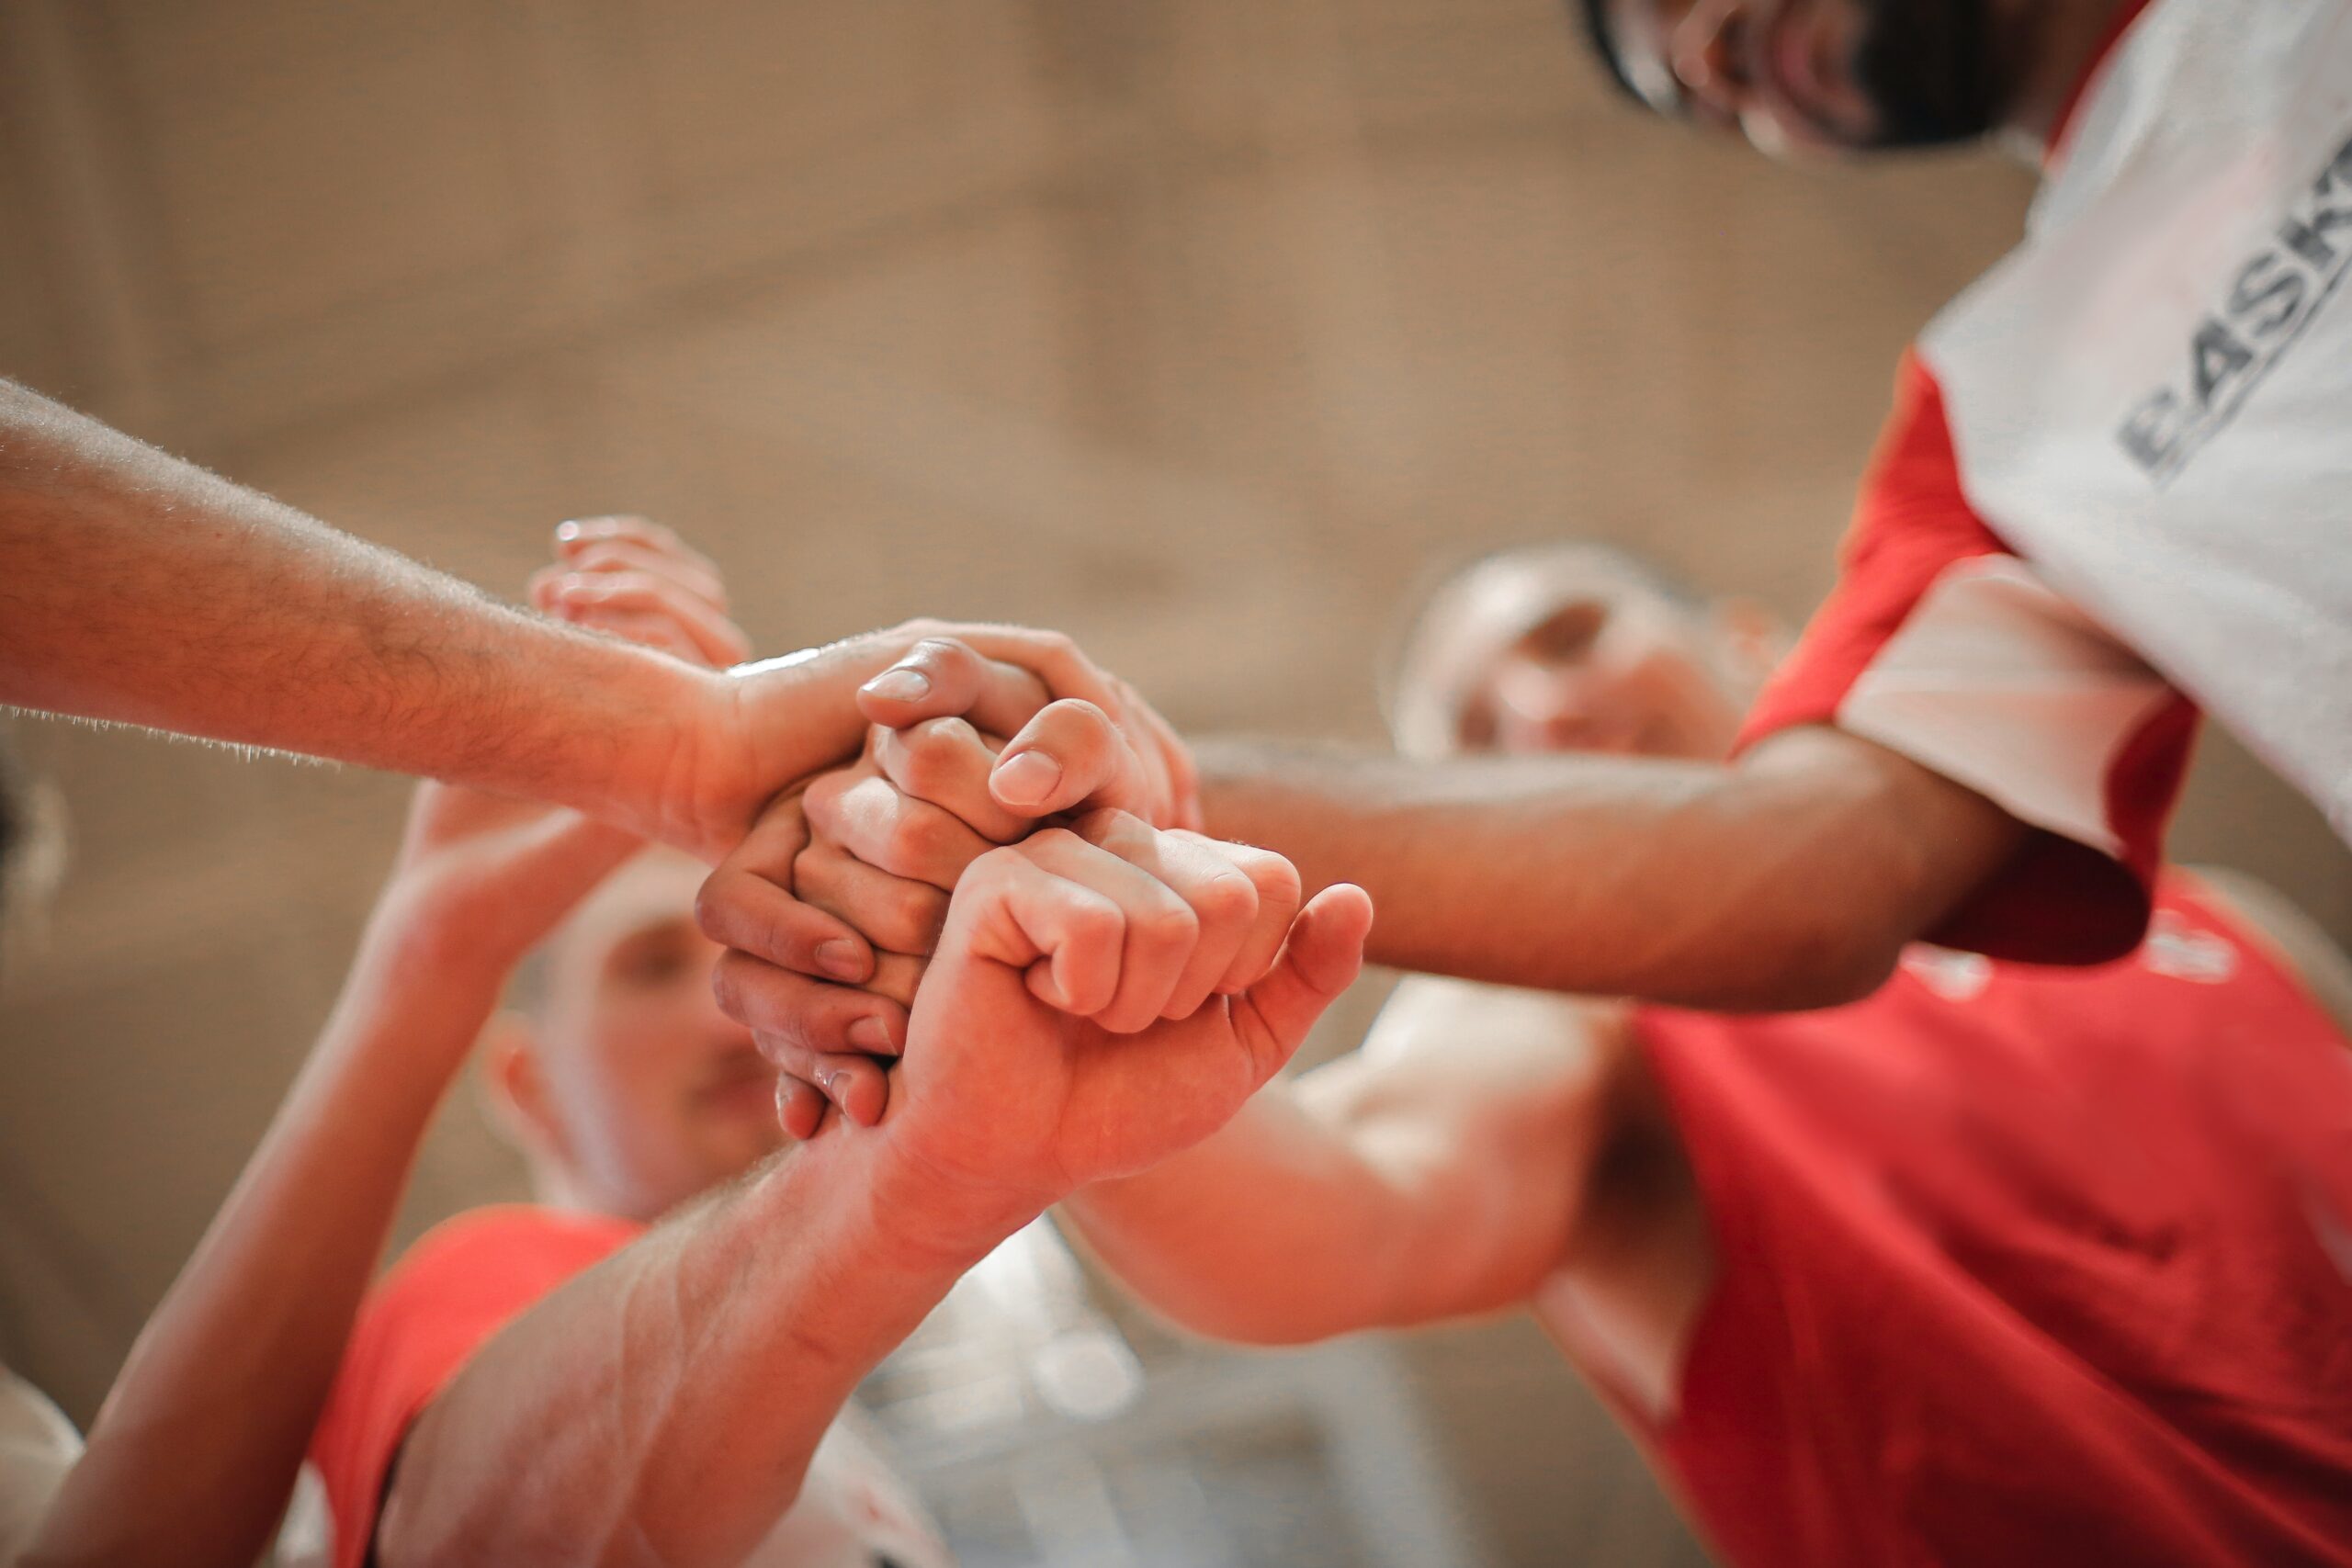 A team joining hands as a sign of team work